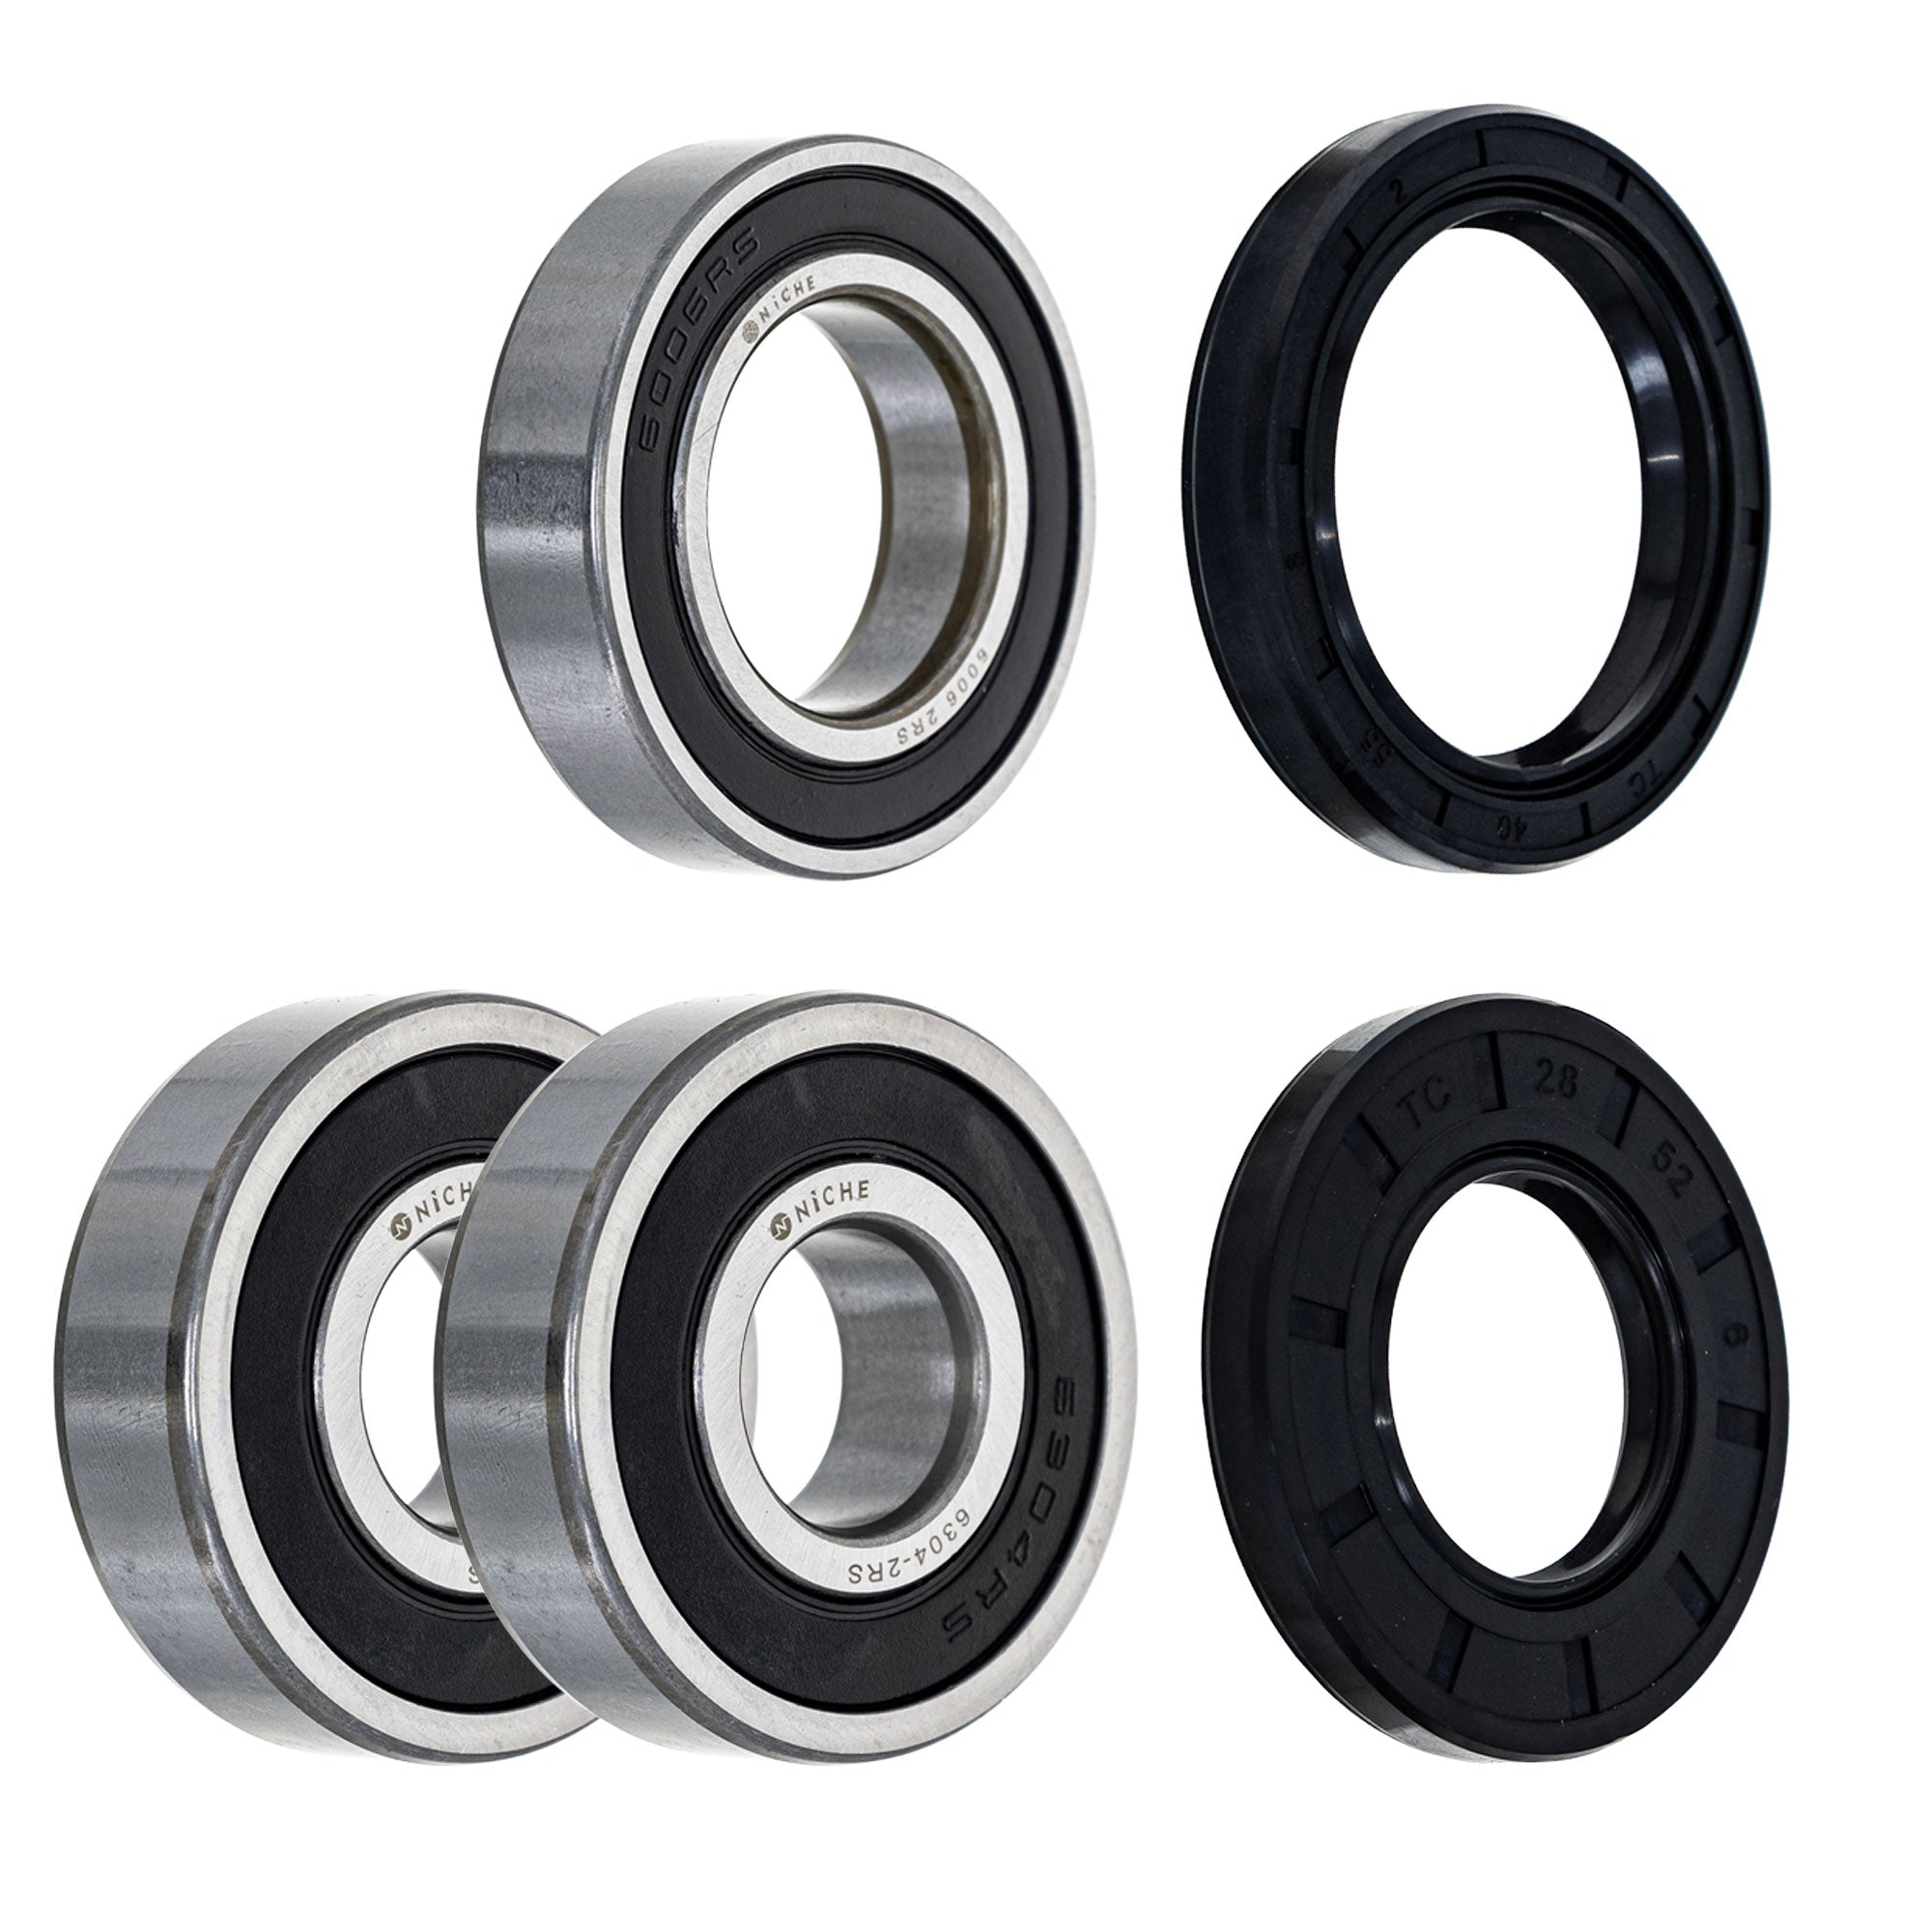 Wheel Bearing Seal Kit for zOTHER ZZR1200 ZRX1200 NICHE MK1008919